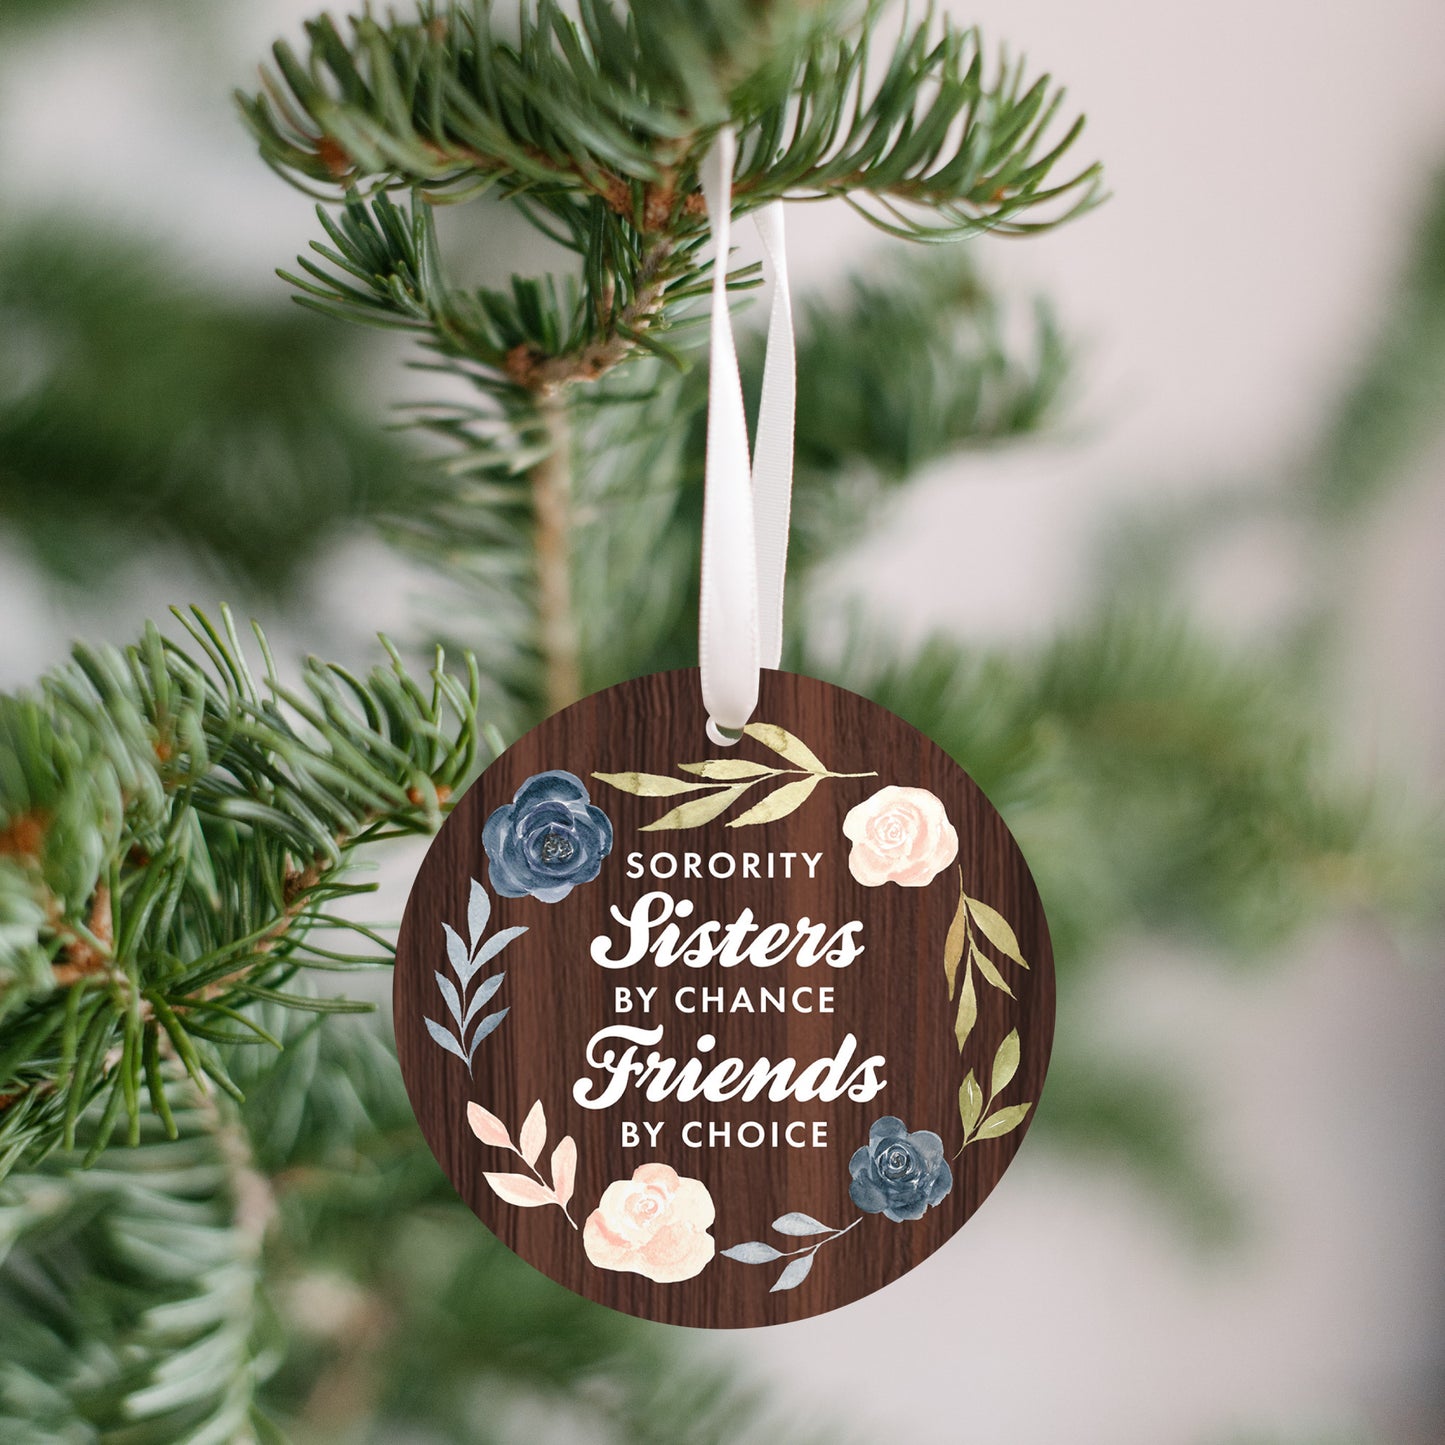 Sorority Sisters By Chance Friends By Choice Ornament